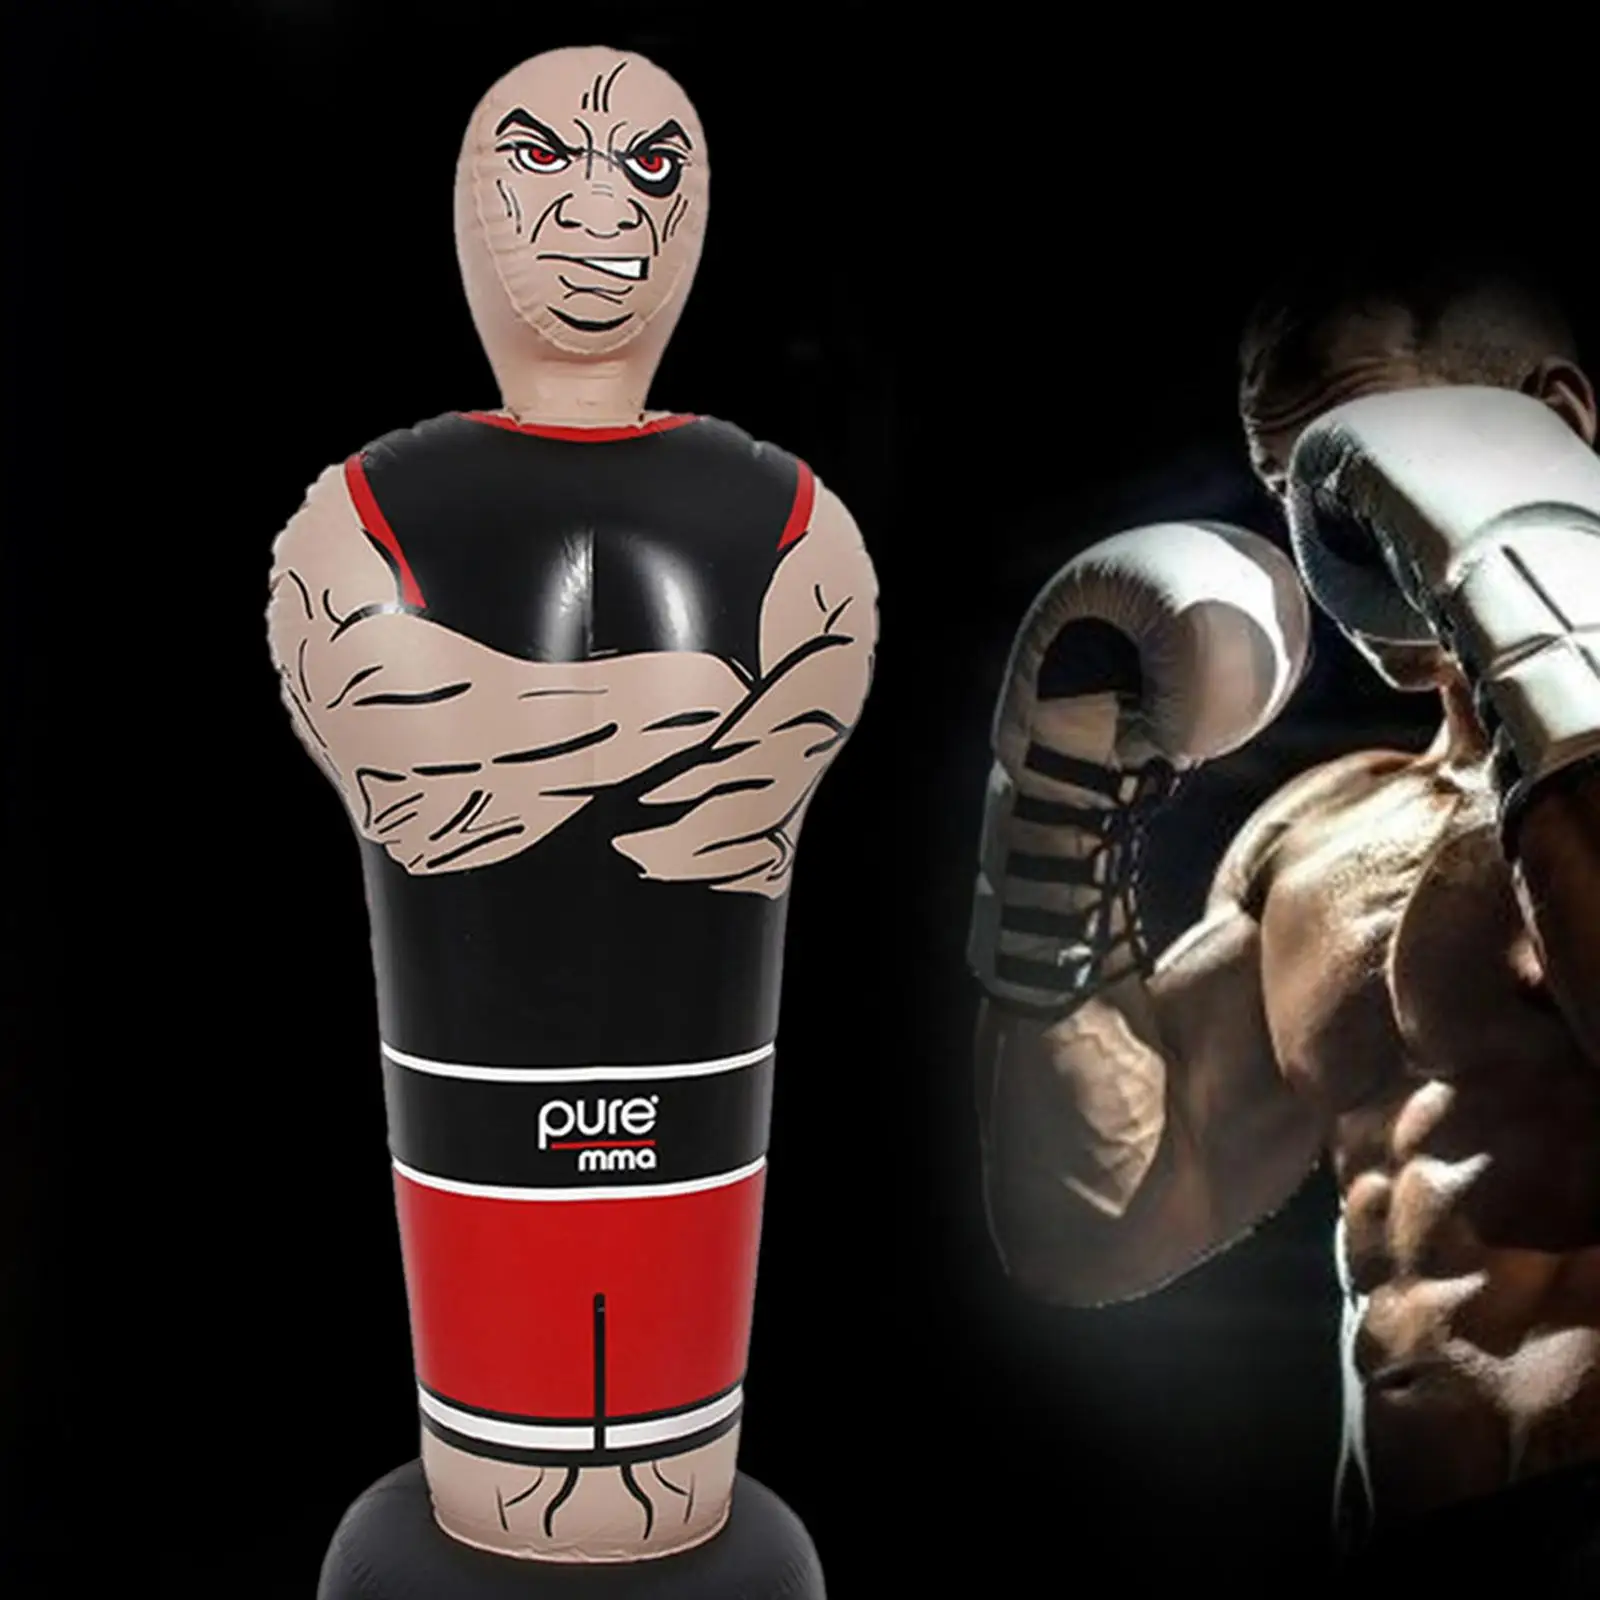 Inflatable Punching Bag Boxing Target Bag Gifts for Boys for Kids Adults for Practice Workout Sports Indoor Outdoor Taekwondo